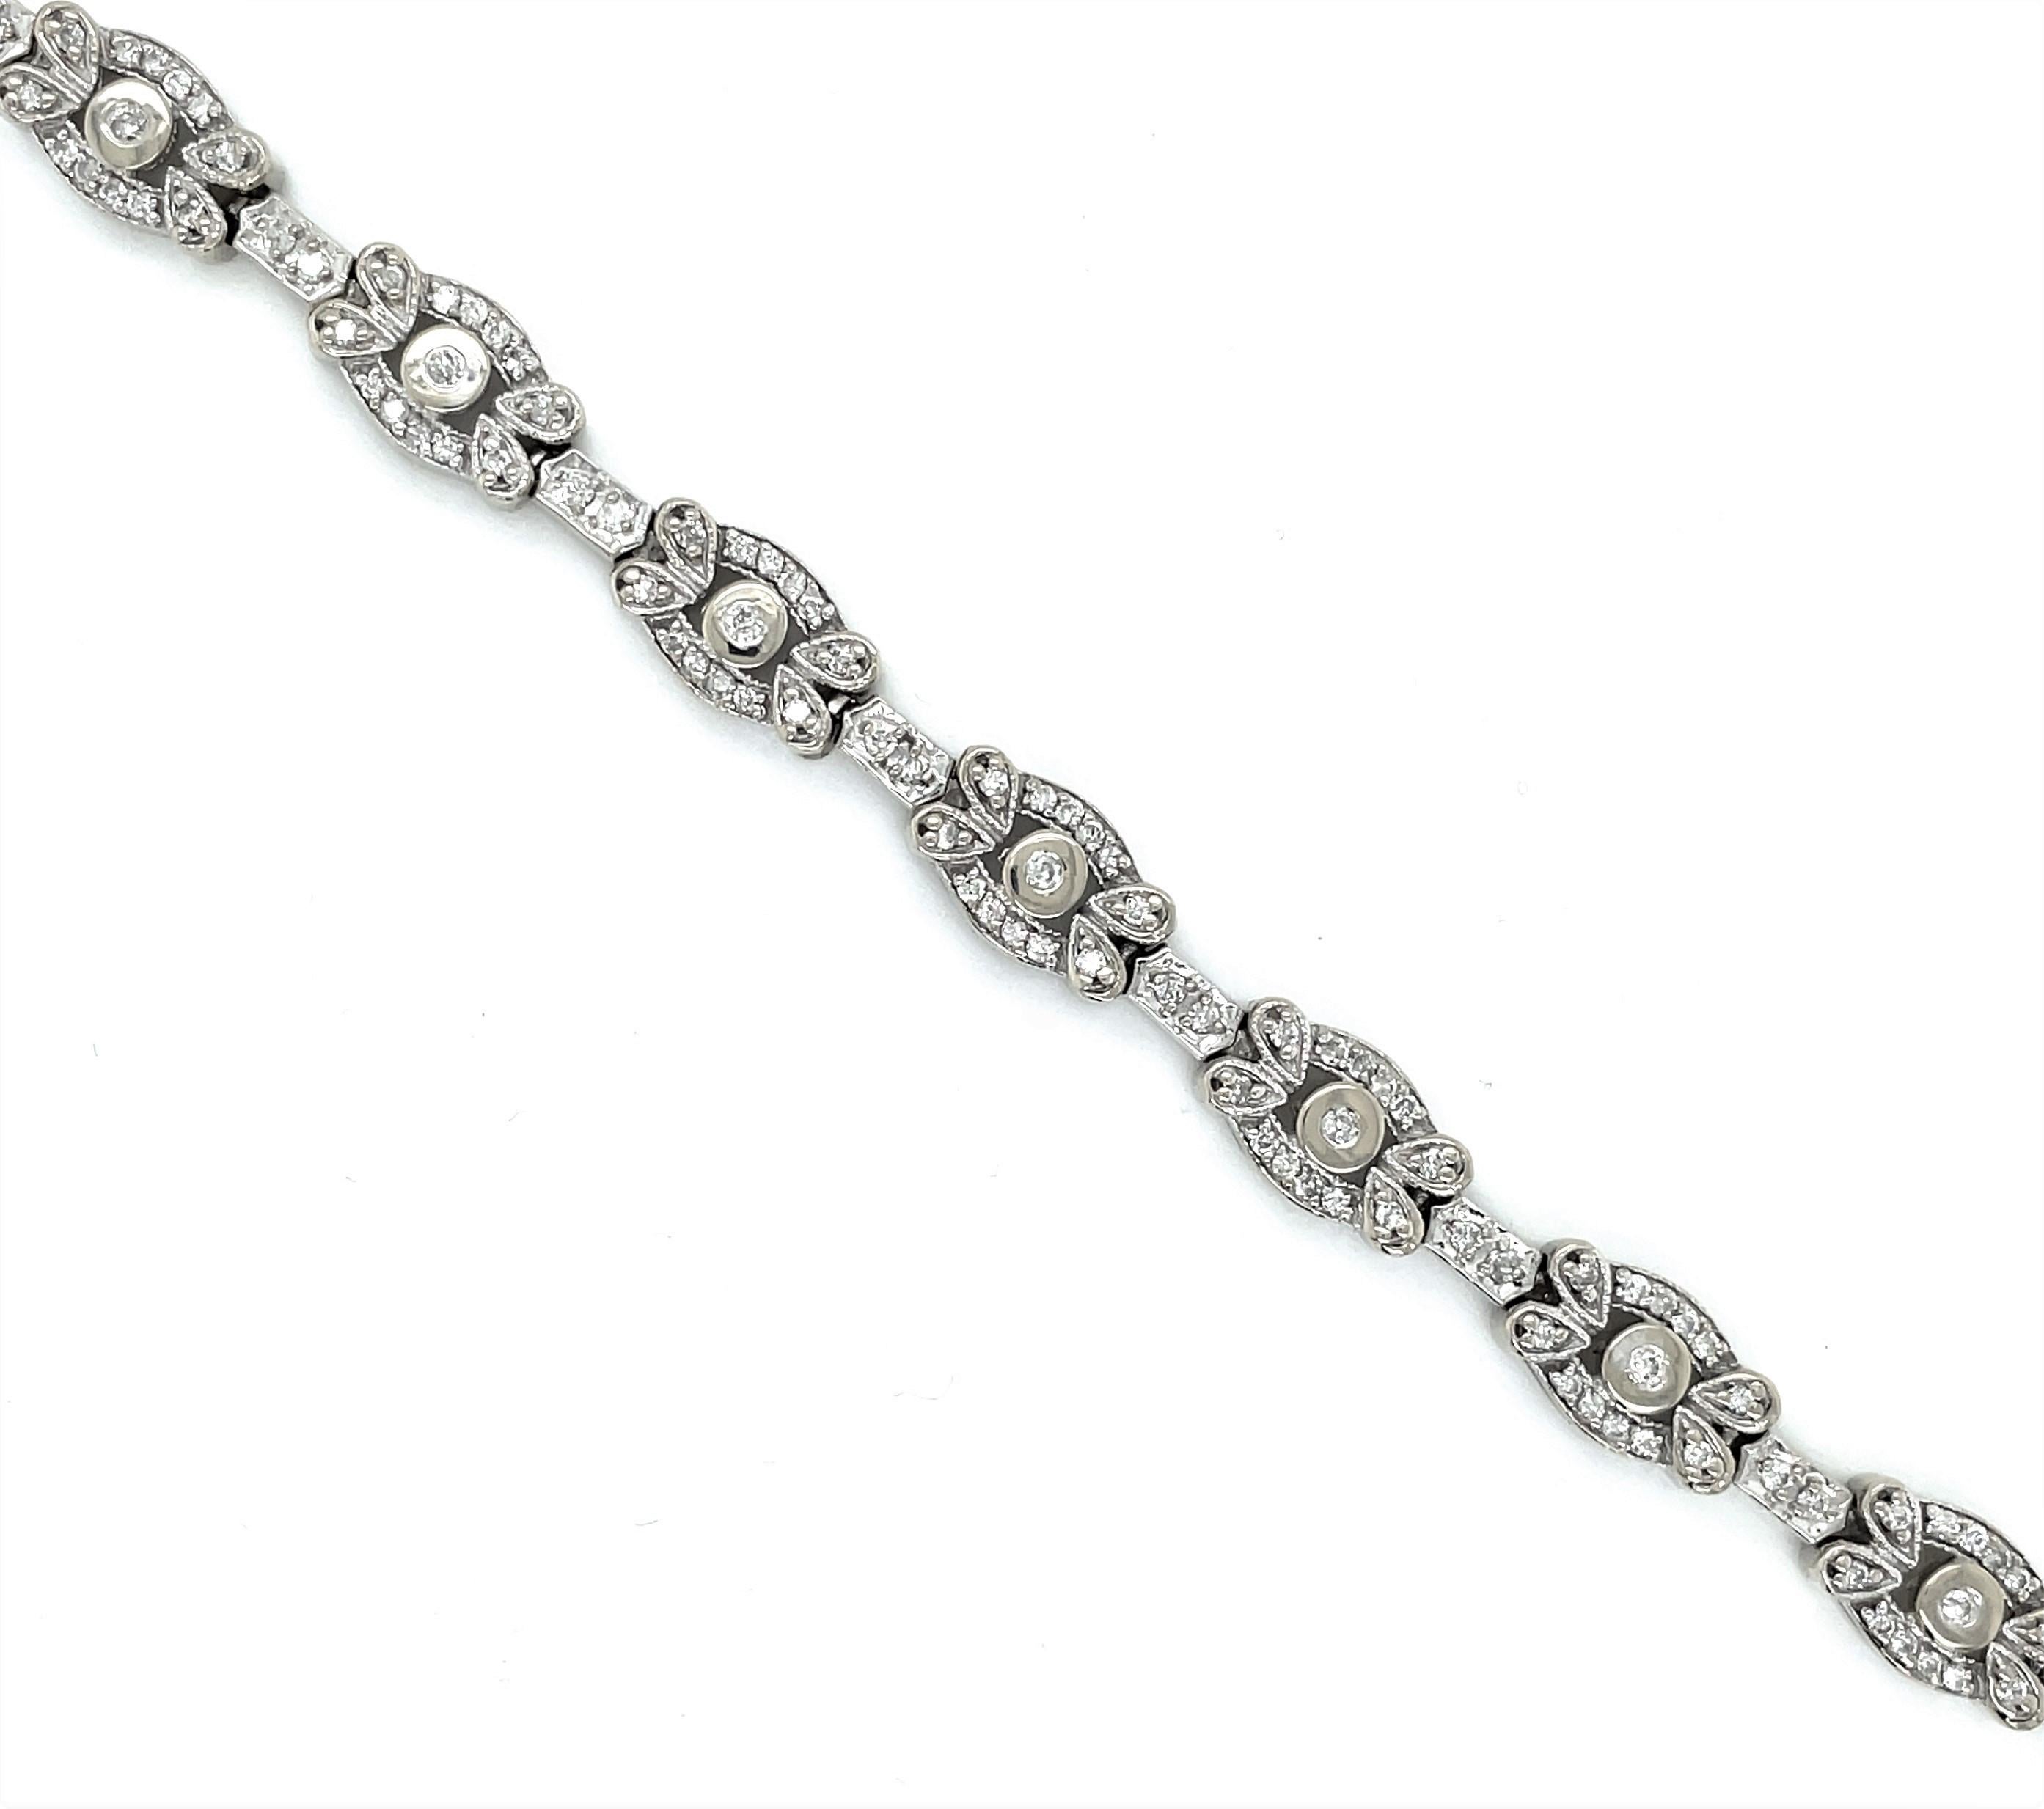 Floral Inspired Diamond Oval Link 14 Karat White Gold Bracelet In Excellent Condition For Sale In Mount Kisco, NY